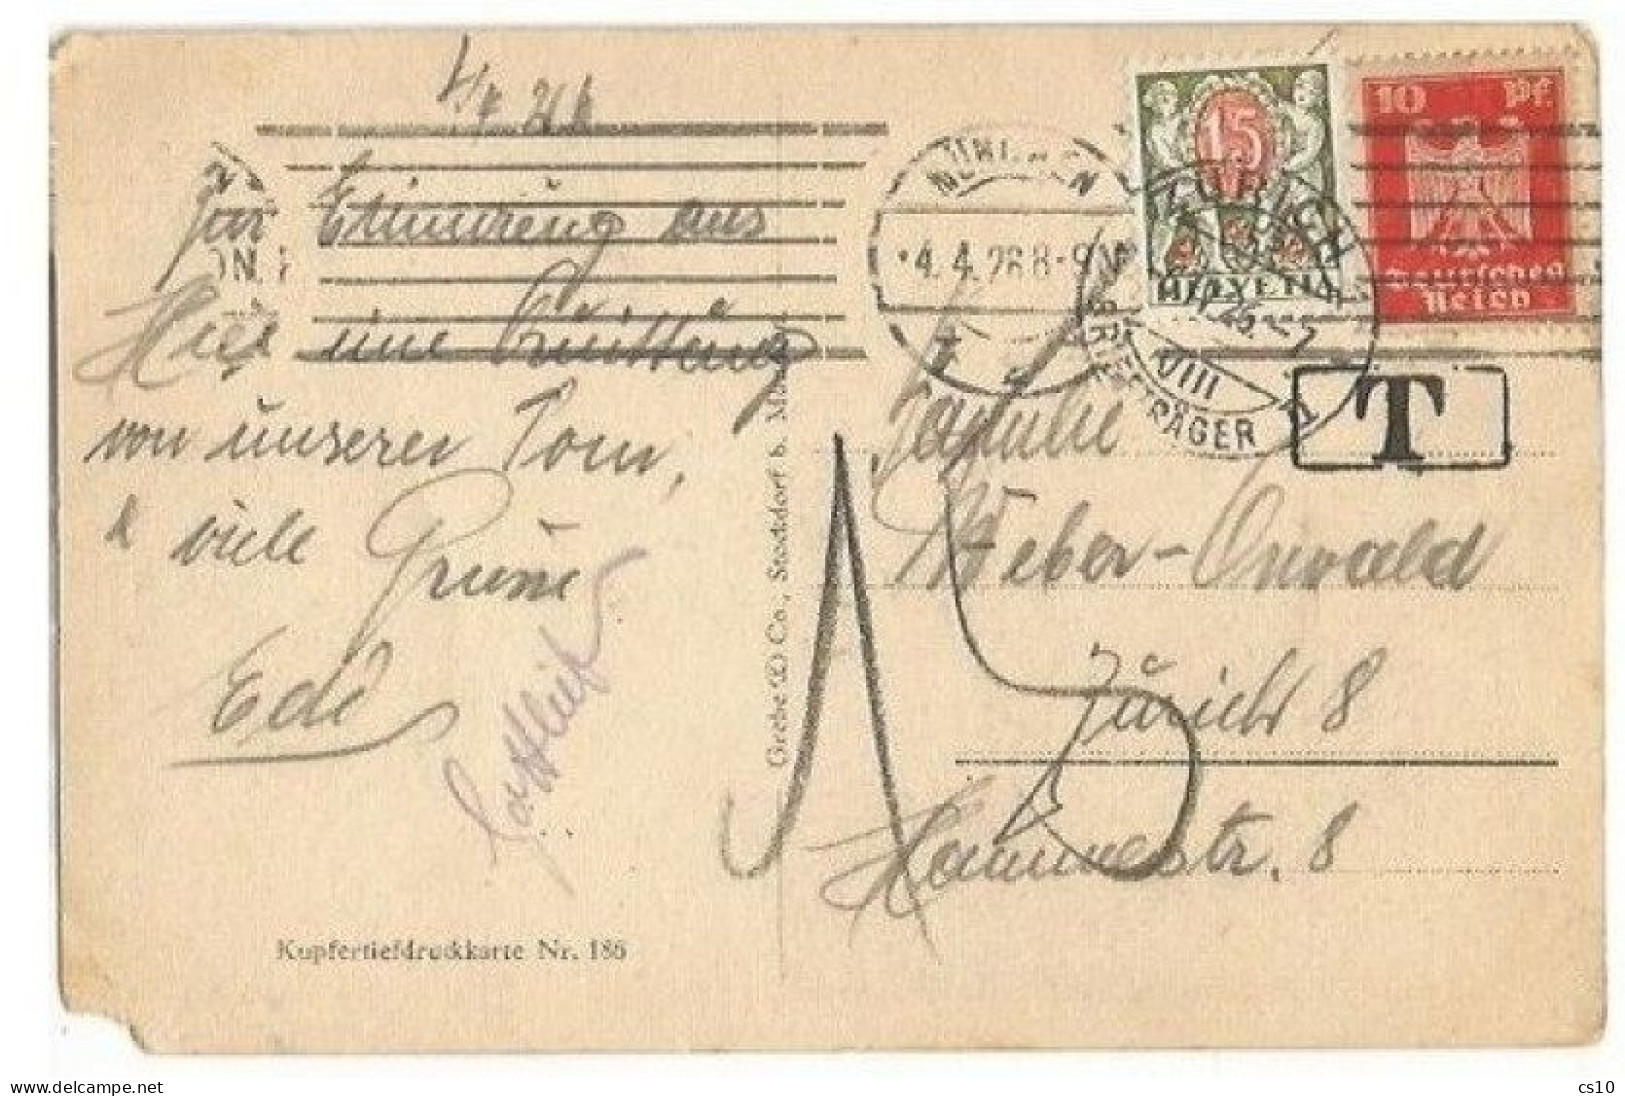 Suisse 6apr1926 Postage Due C.15 Taxing Pcard Munchen 4apr With Eagle Pf10 Solo To Zurich - Postage Due